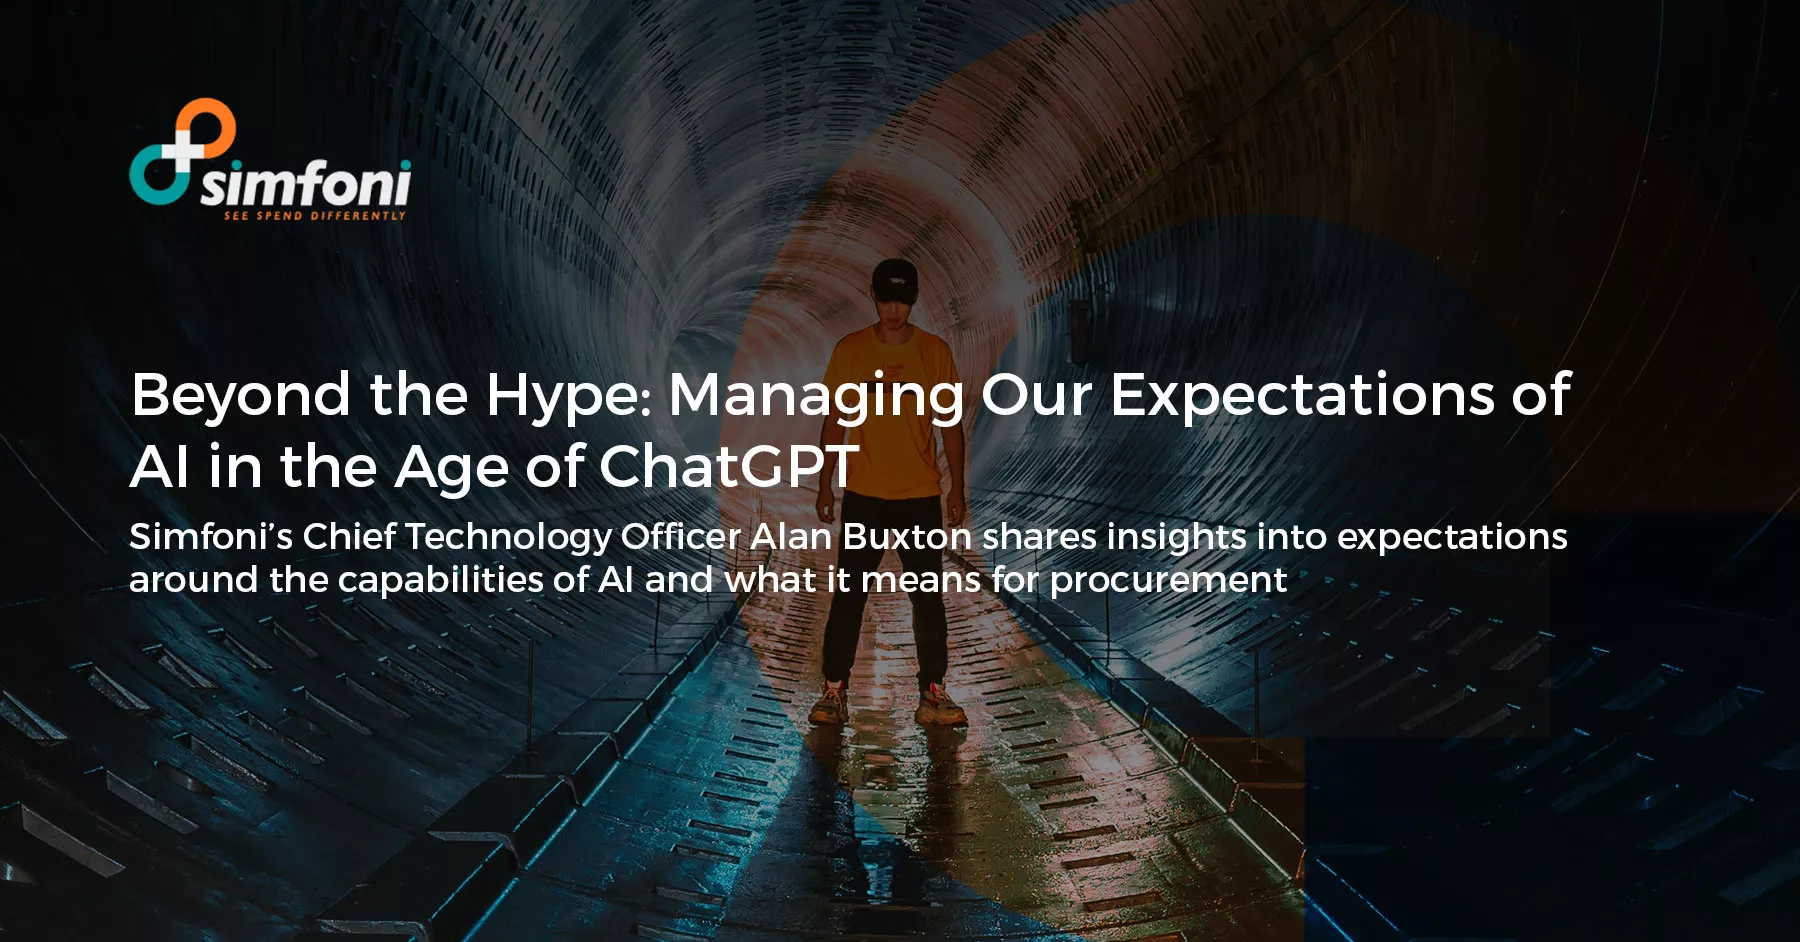 AI in the Age of ChatGPT